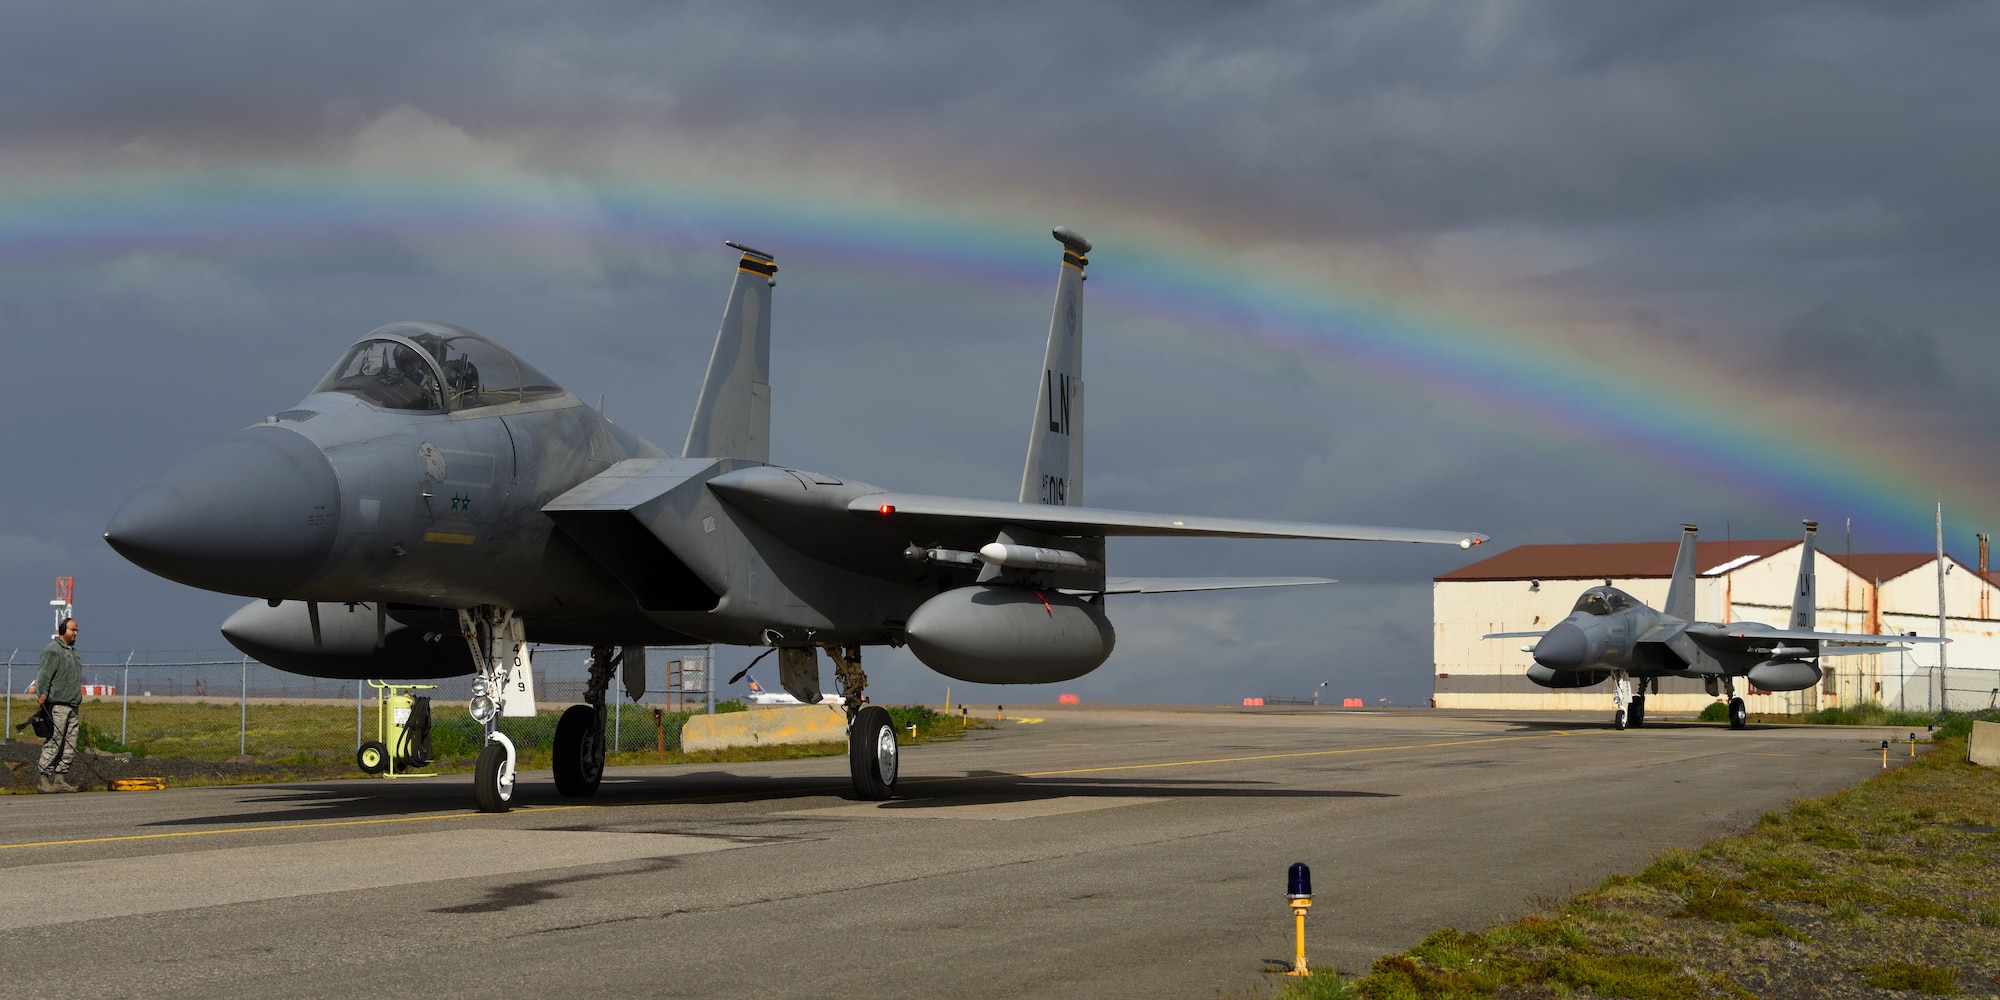 Two F-15C Eagles assigned to the 493rd Expeditionary Fighter Squadron taxi at Keflavik Air Base, Iceland, July 30, 2018 in support of NATO’s Icelandic Air Surveillance mission. The U.S. routinely and visibly demonstrates commitment to its allies and partners through the global employment of its military forces. (U.S. Air Force photo/ Staff Sgt. Alex Fox Echols III)